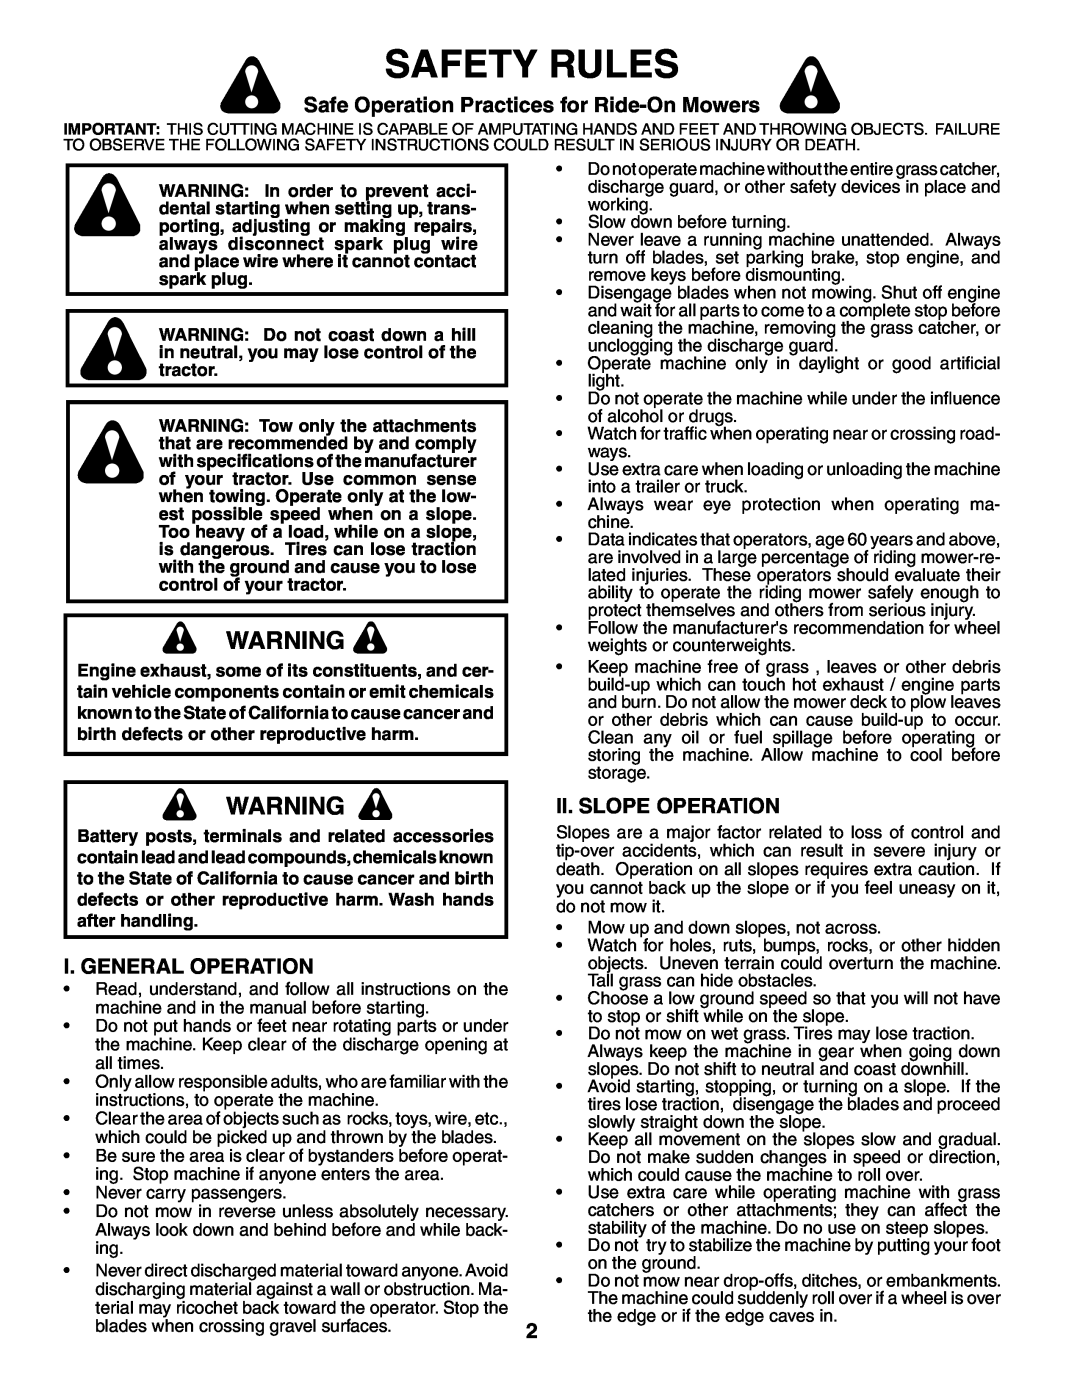 Weed Eater 96016000100 manual Safety Rules, Safe Operation Practices for Ride-On Mowers, I. General Operation 